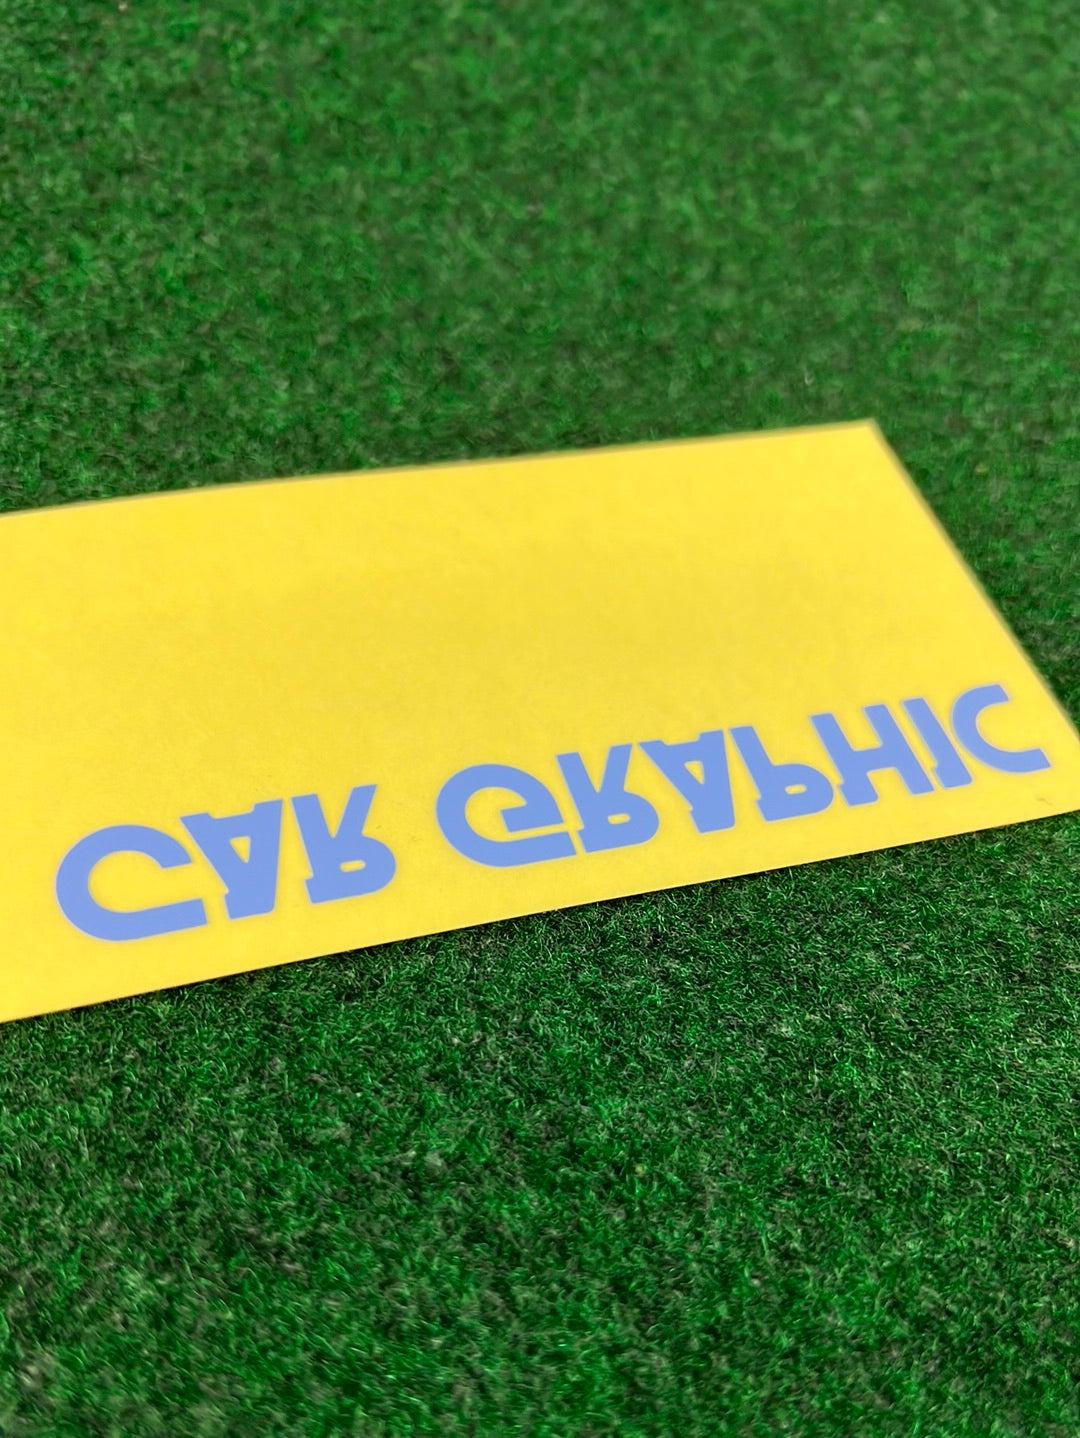 CG Car Graphic - Logo Decal Stickers